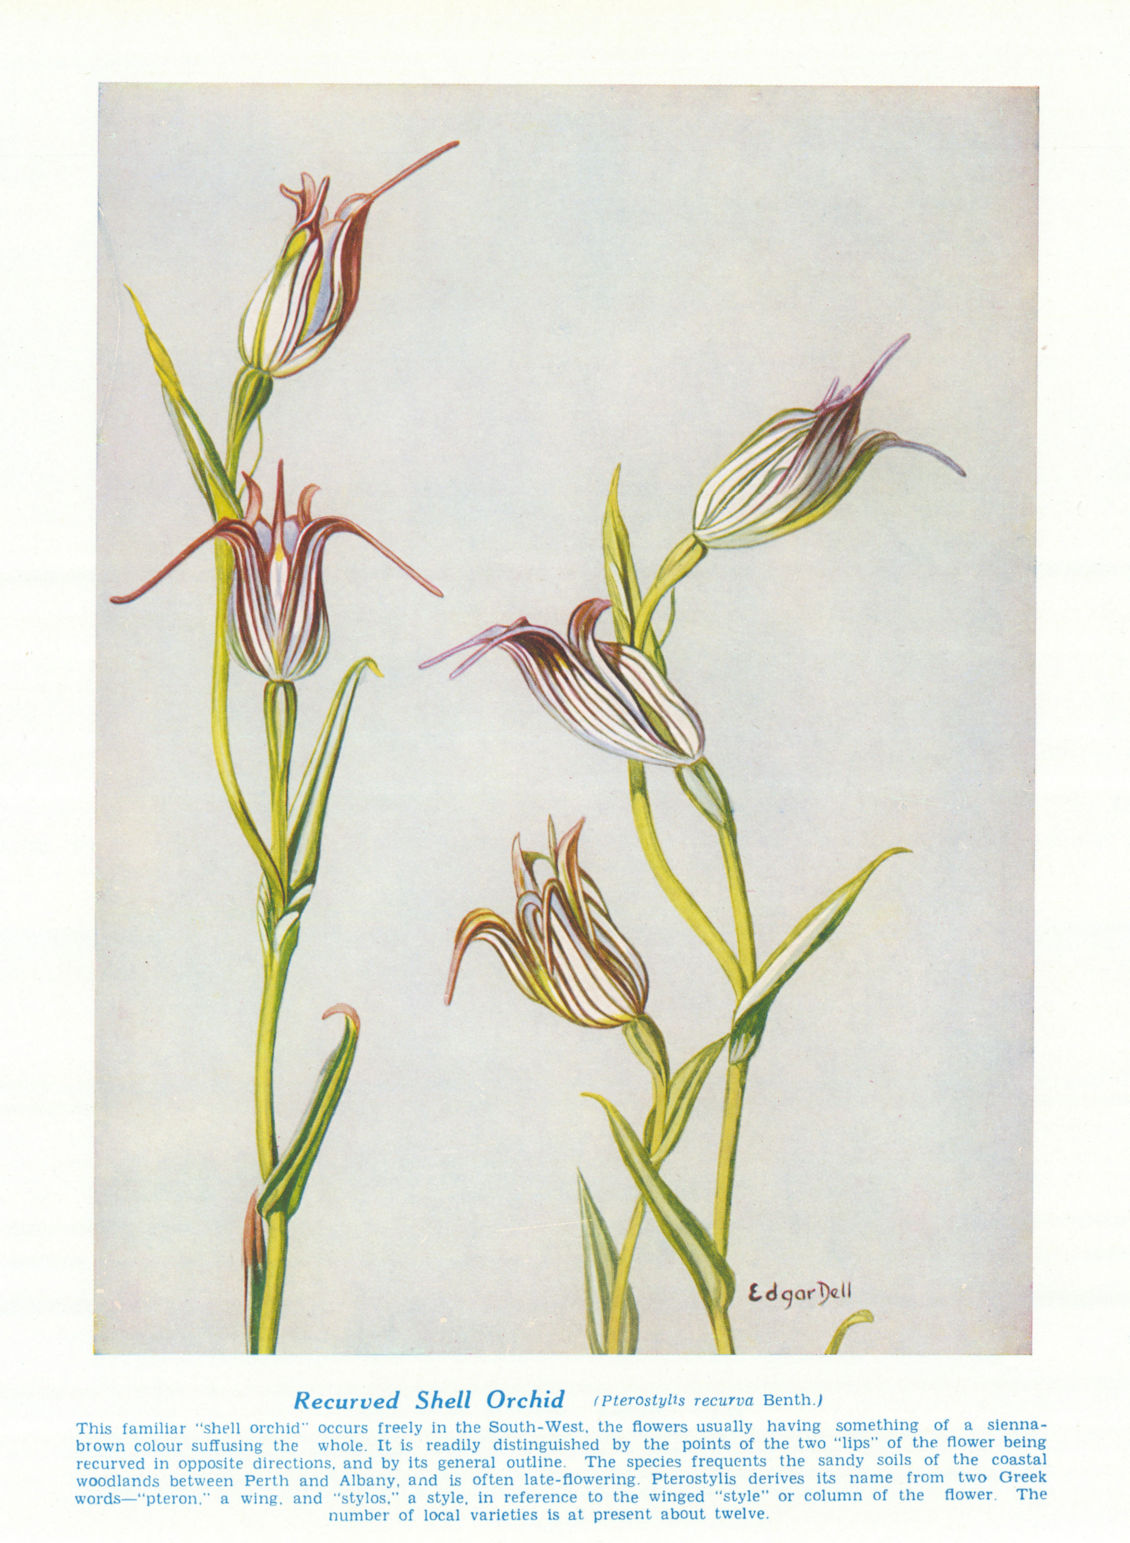 Recurved Shell Orchid (Pterostylis recurva). West Australian Wild Flowers 1950